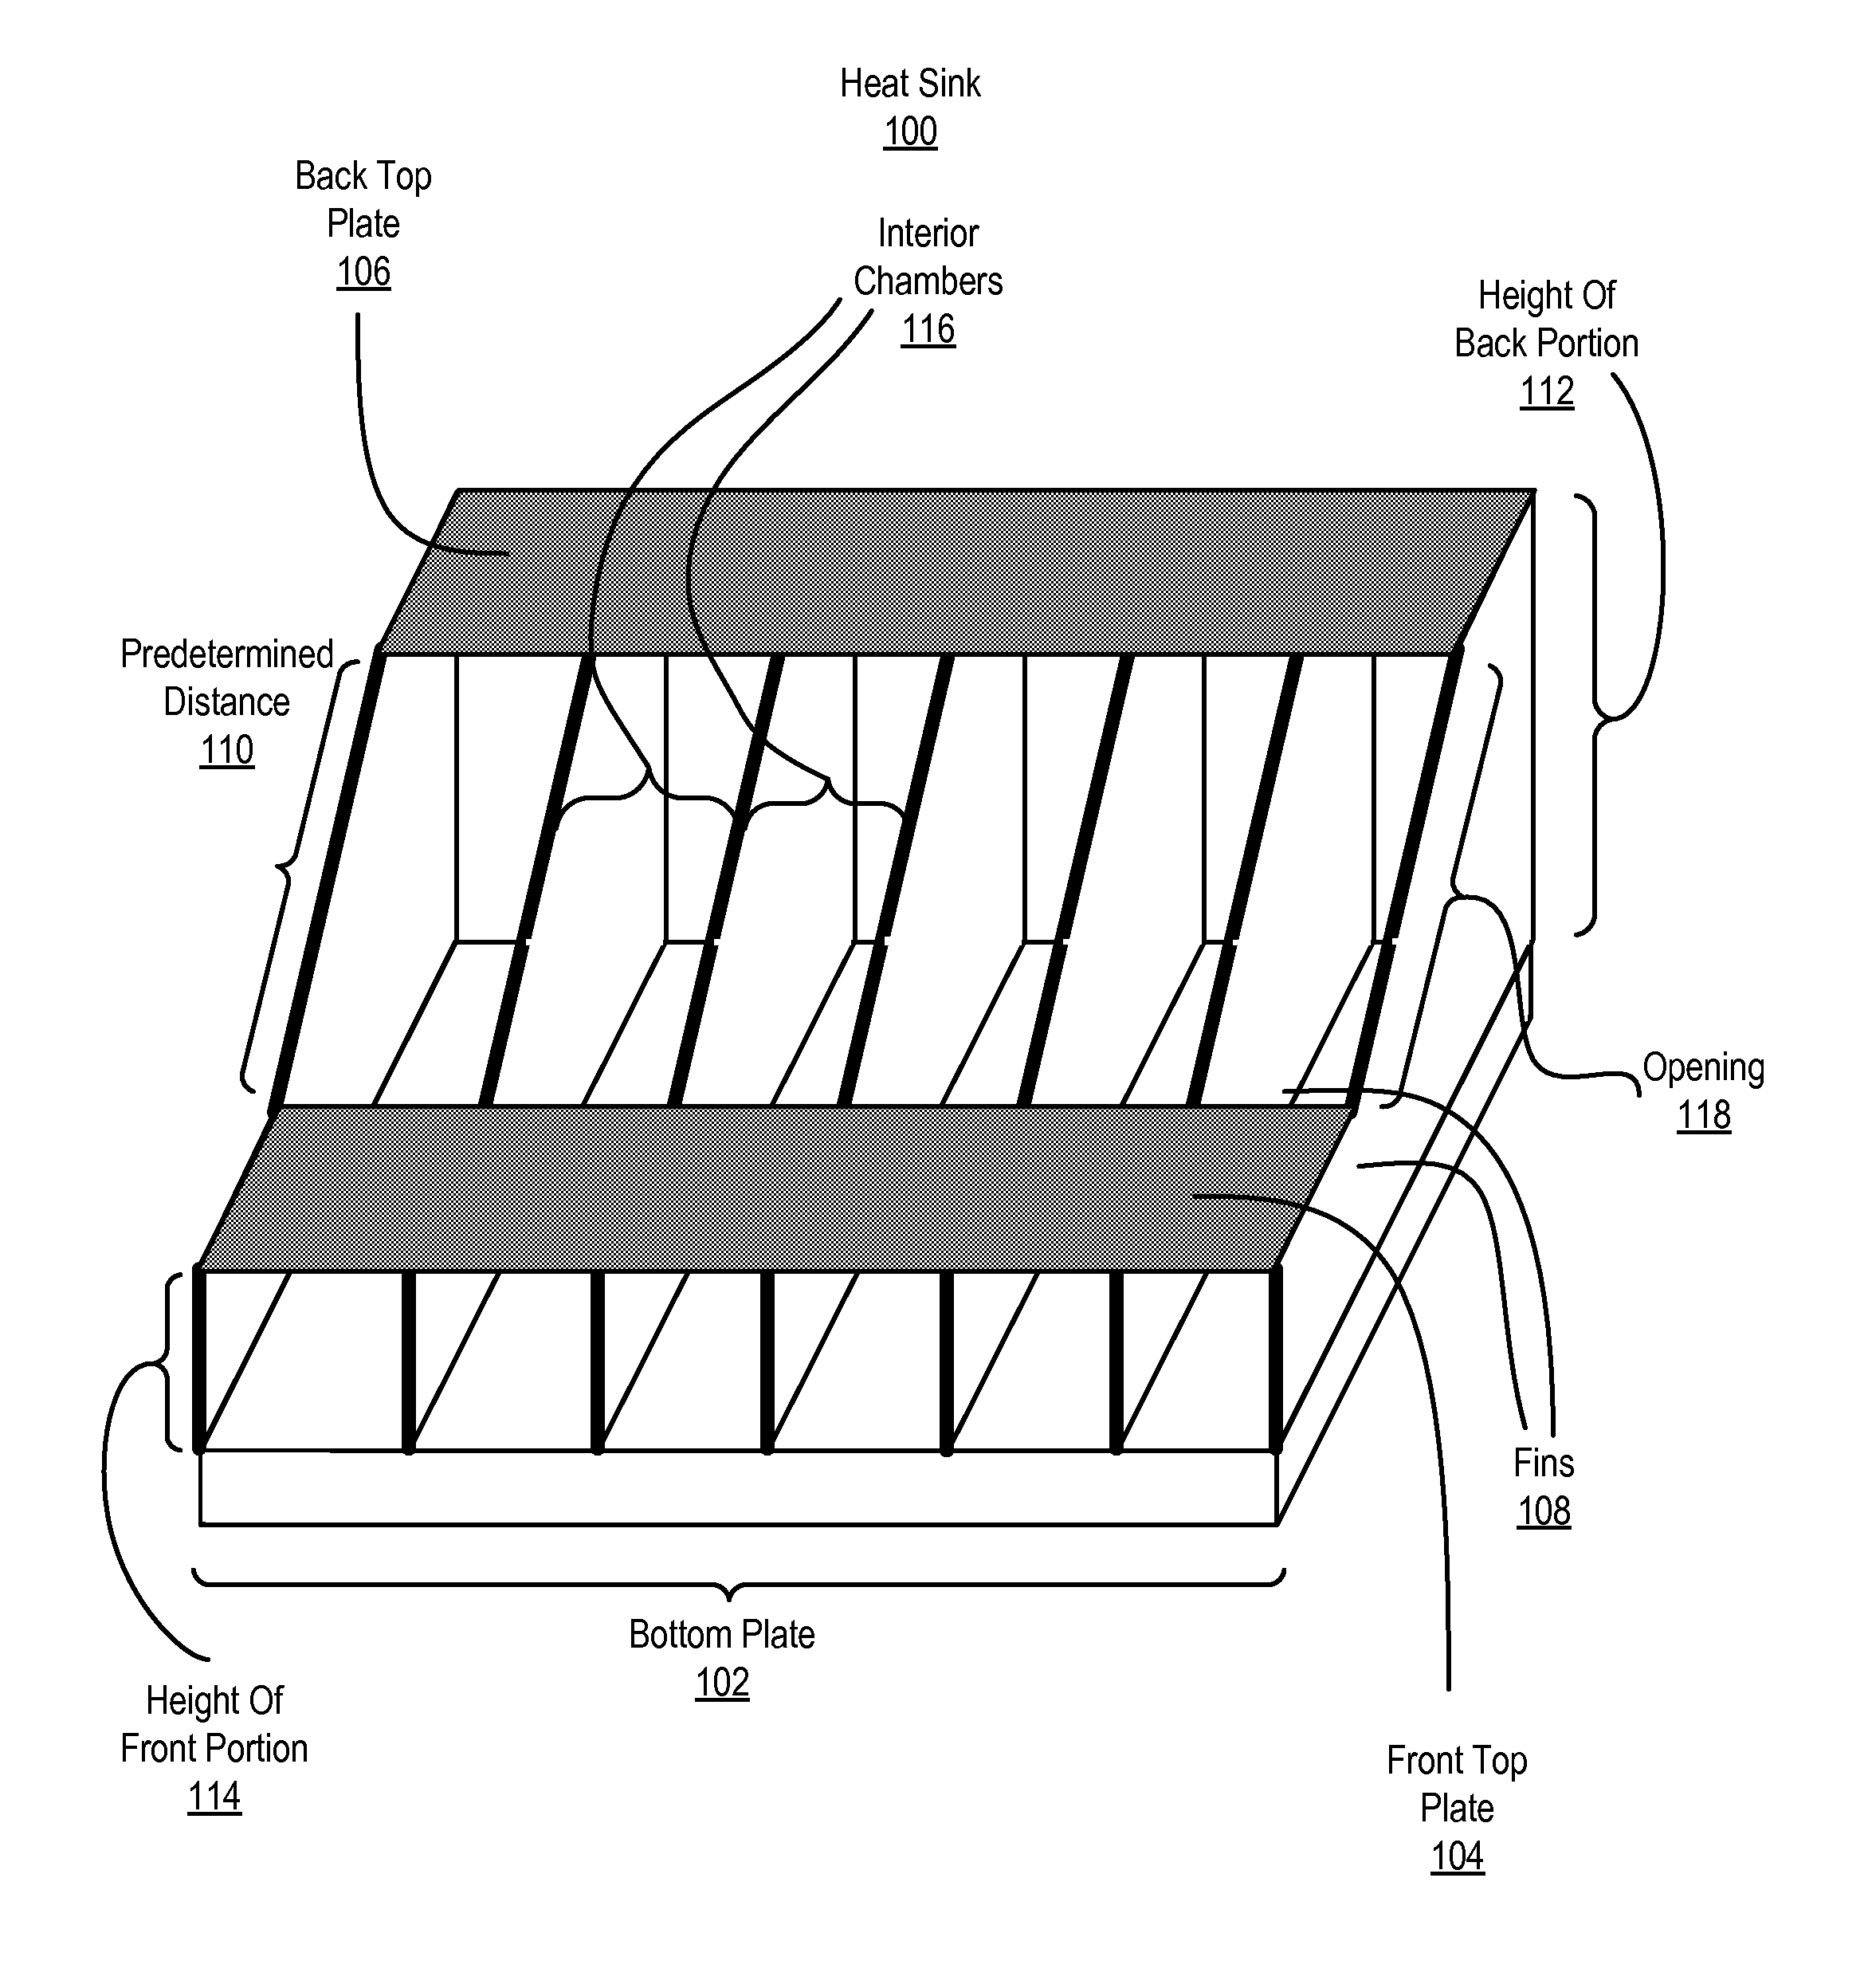 Heat Sink For Distributing A Thermal Load